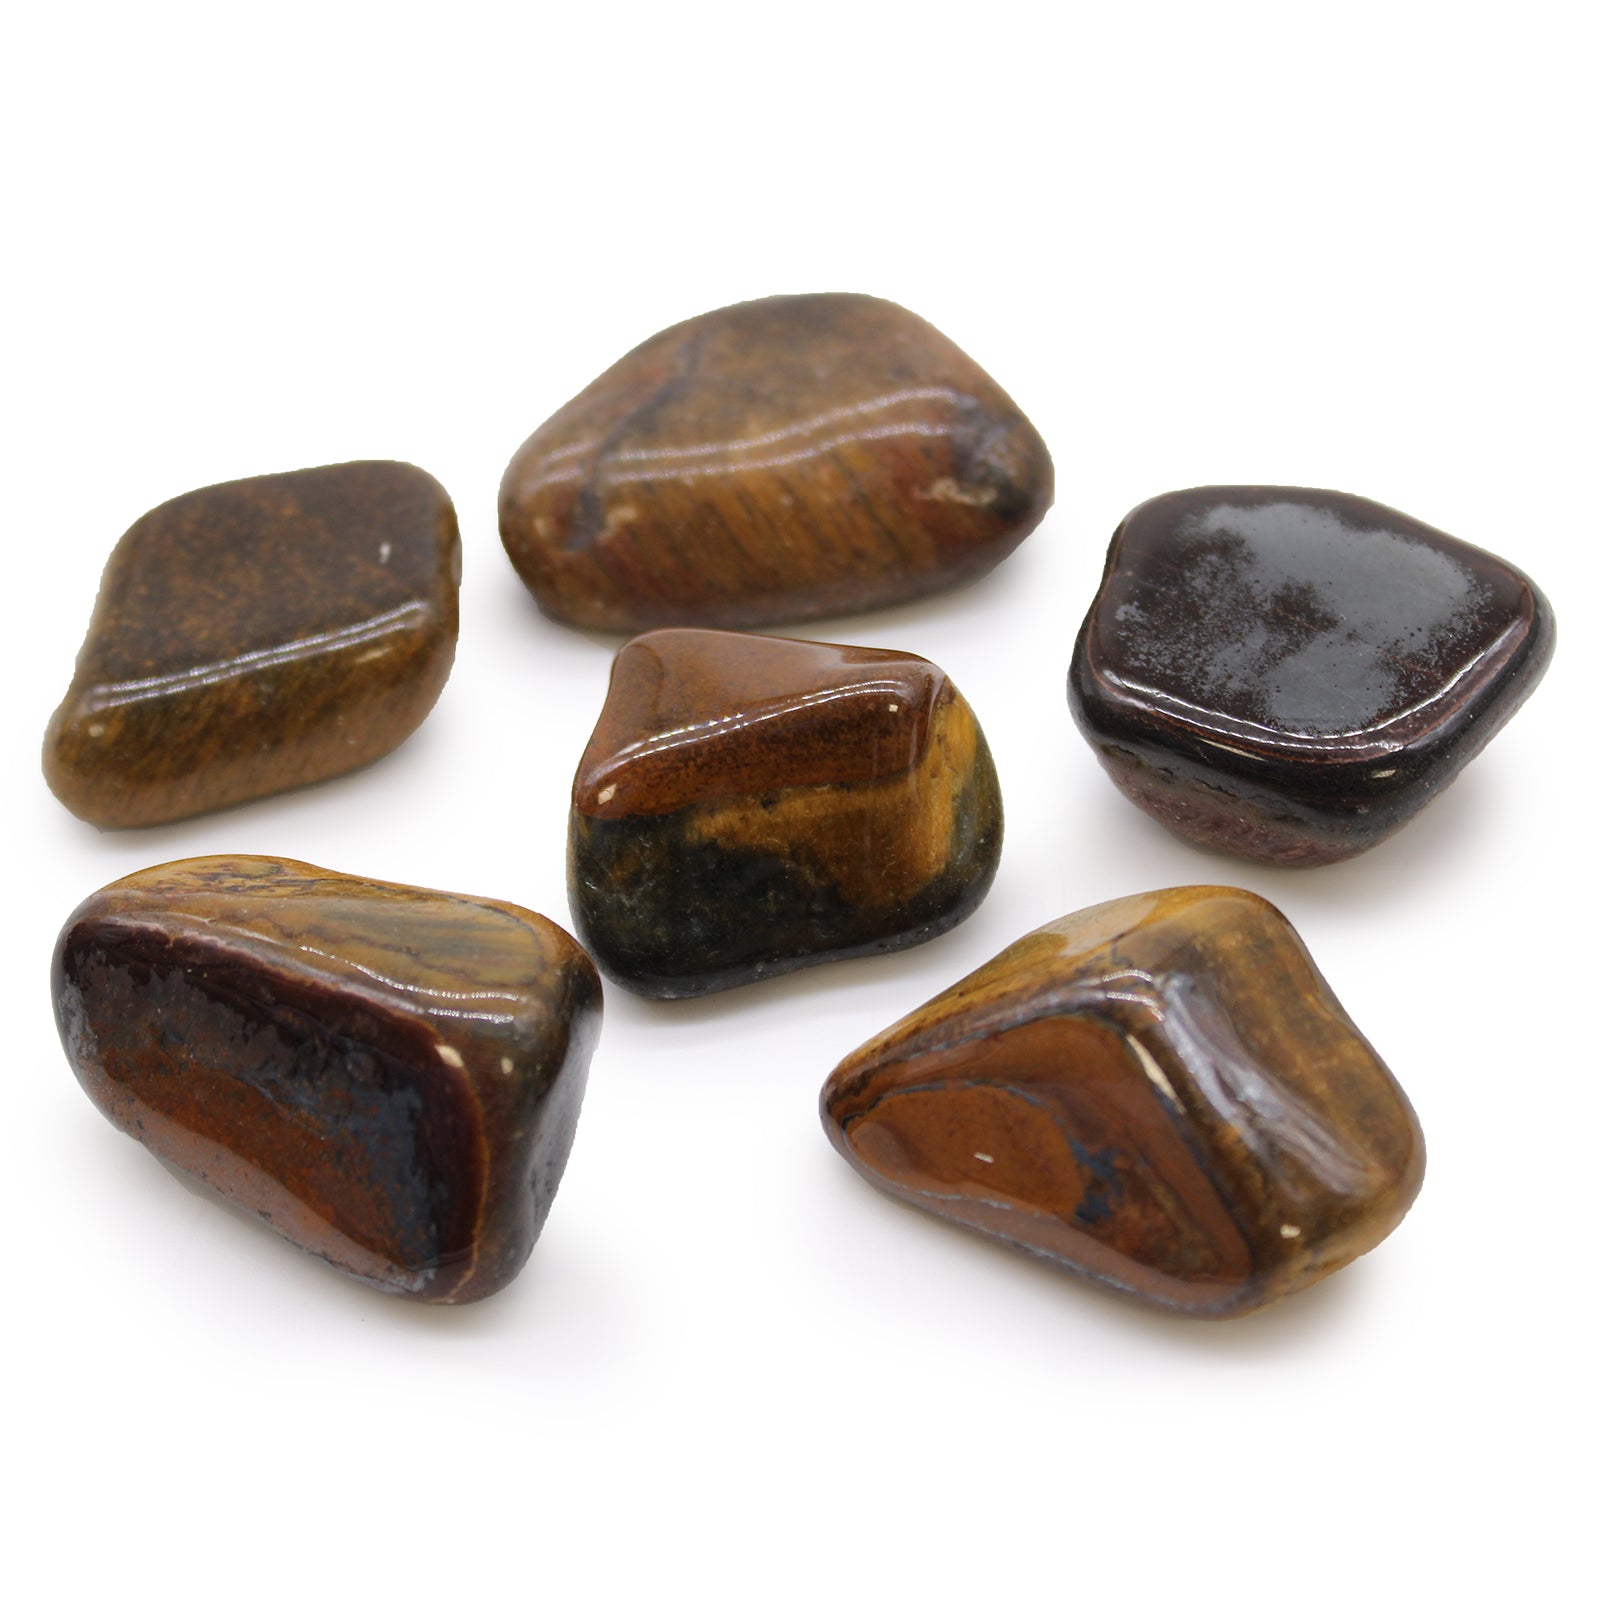 View Large African Tumble Stones Tigers Eye Varigated information